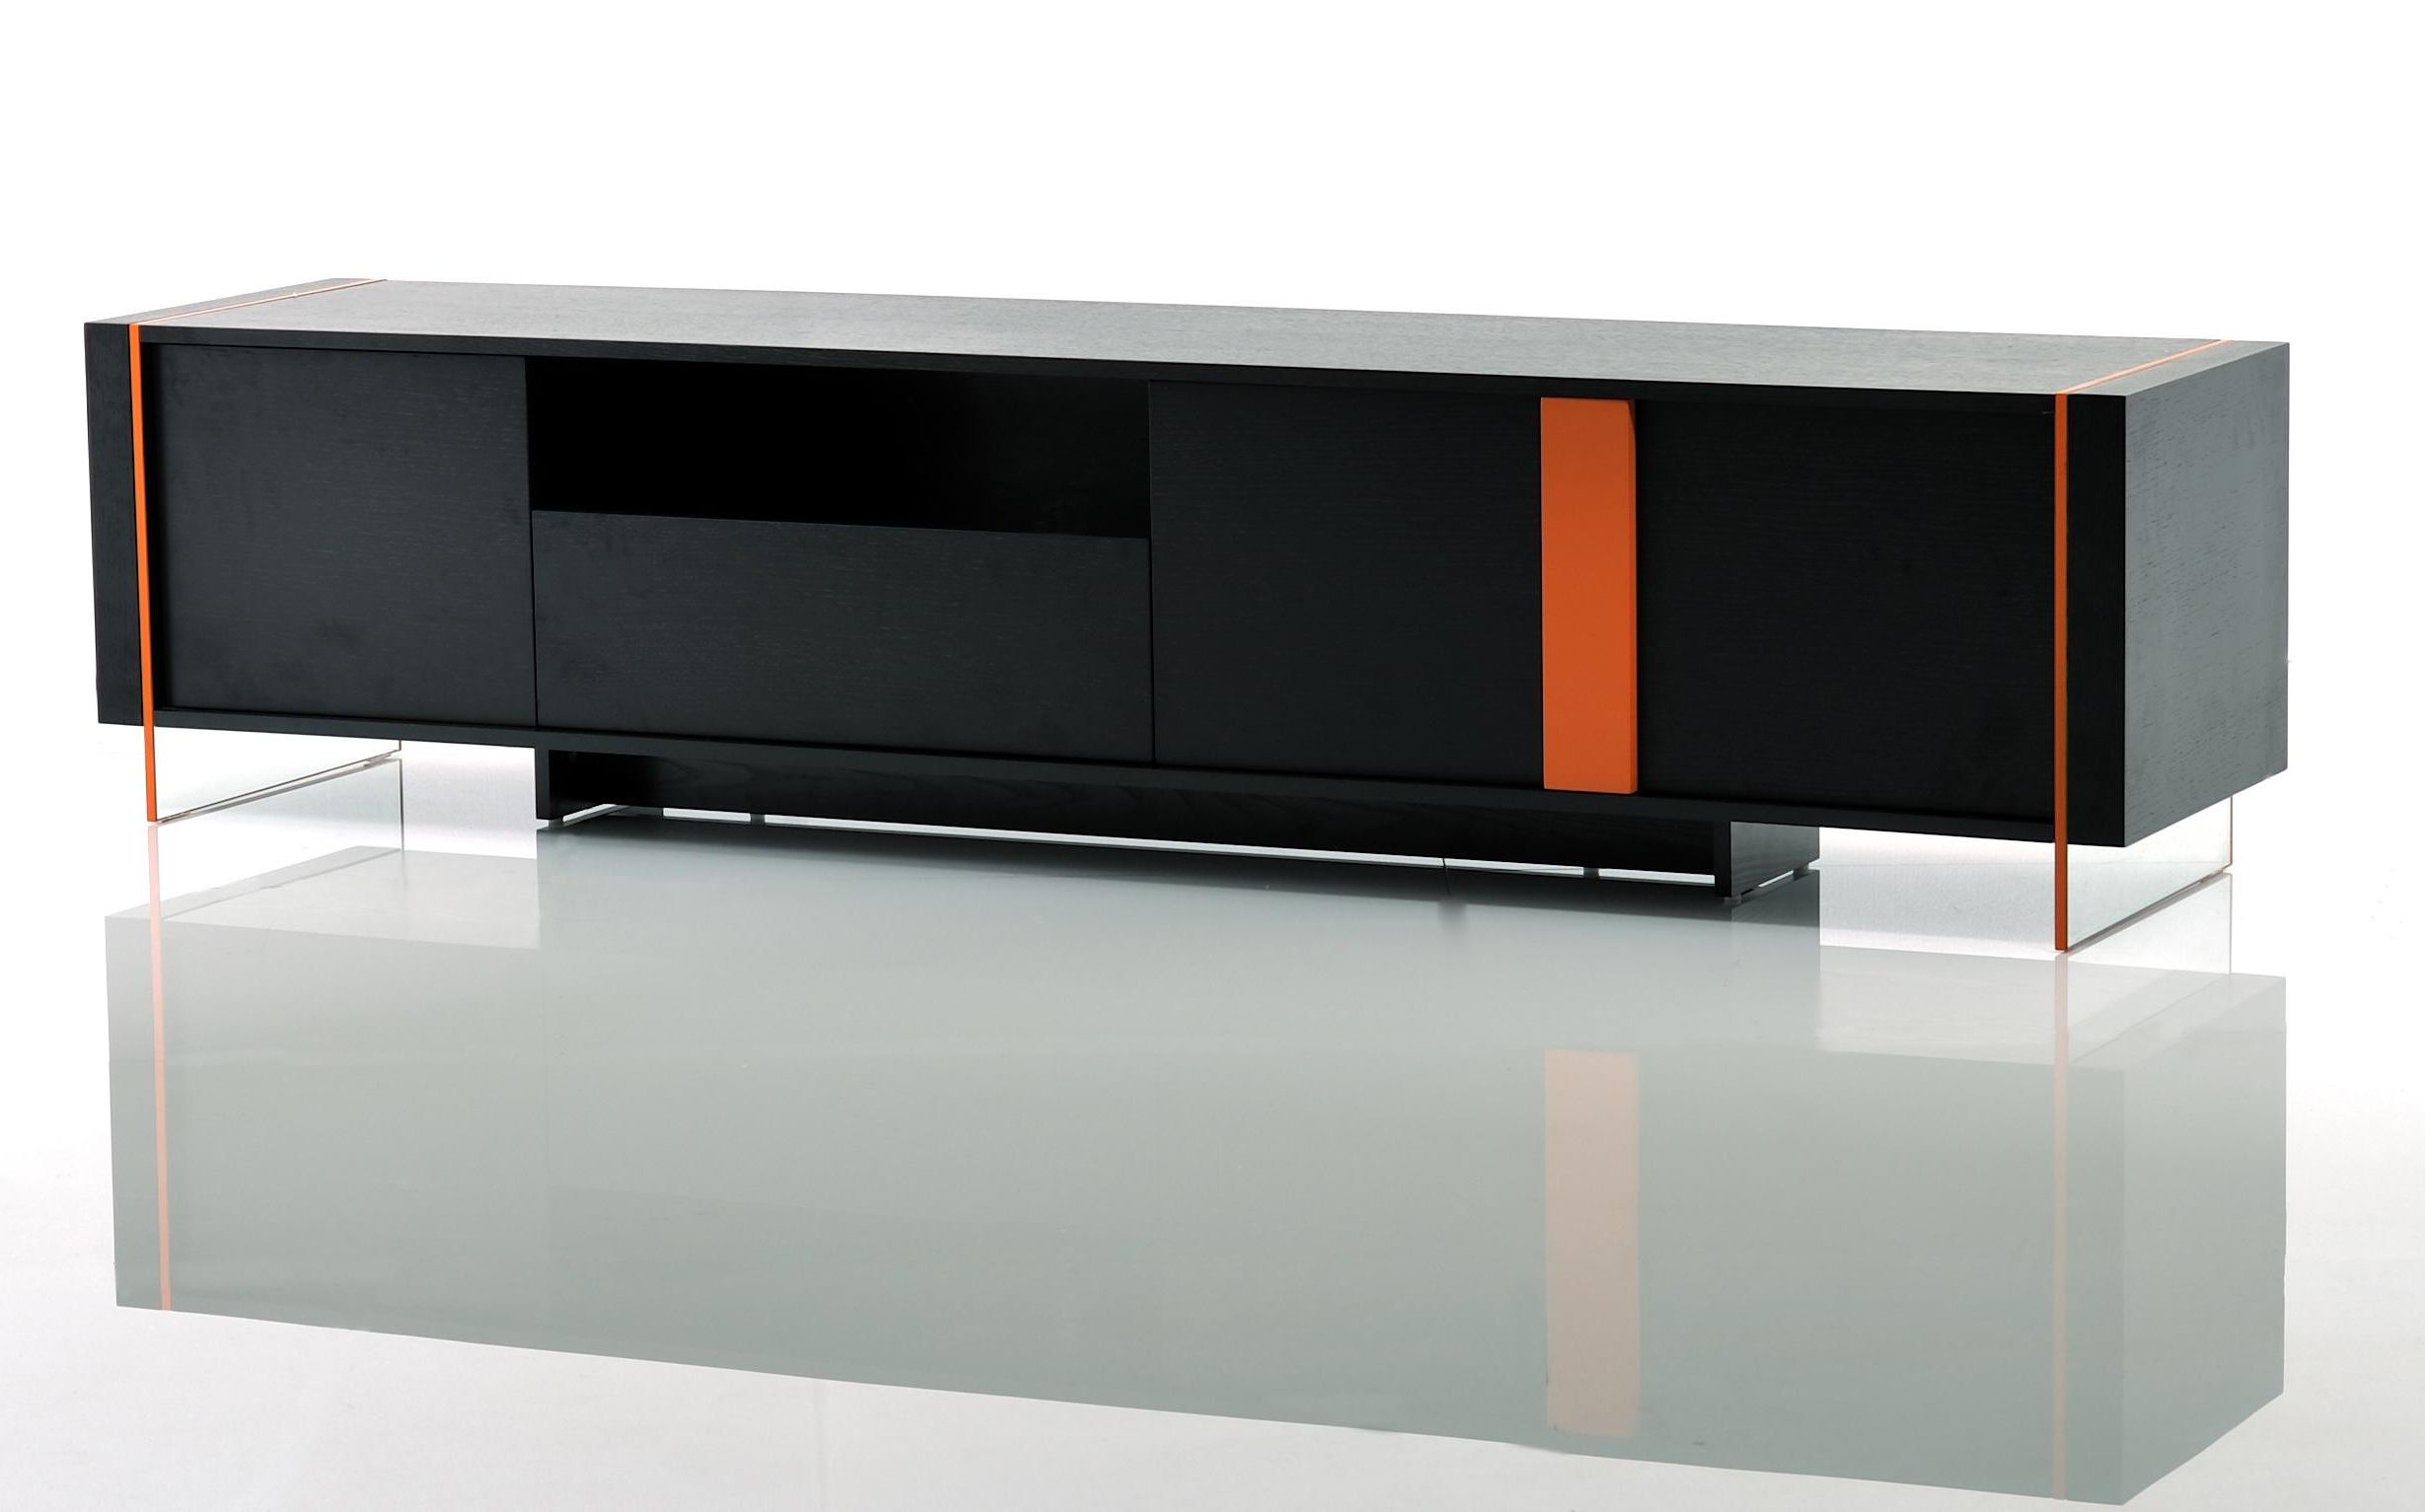 Best And Newest Floating Tv Cabinets Pertaining To Contemporary Black Oak And Orange Floating Tv Stand Austin Texas Vvis (View 17 of 20)